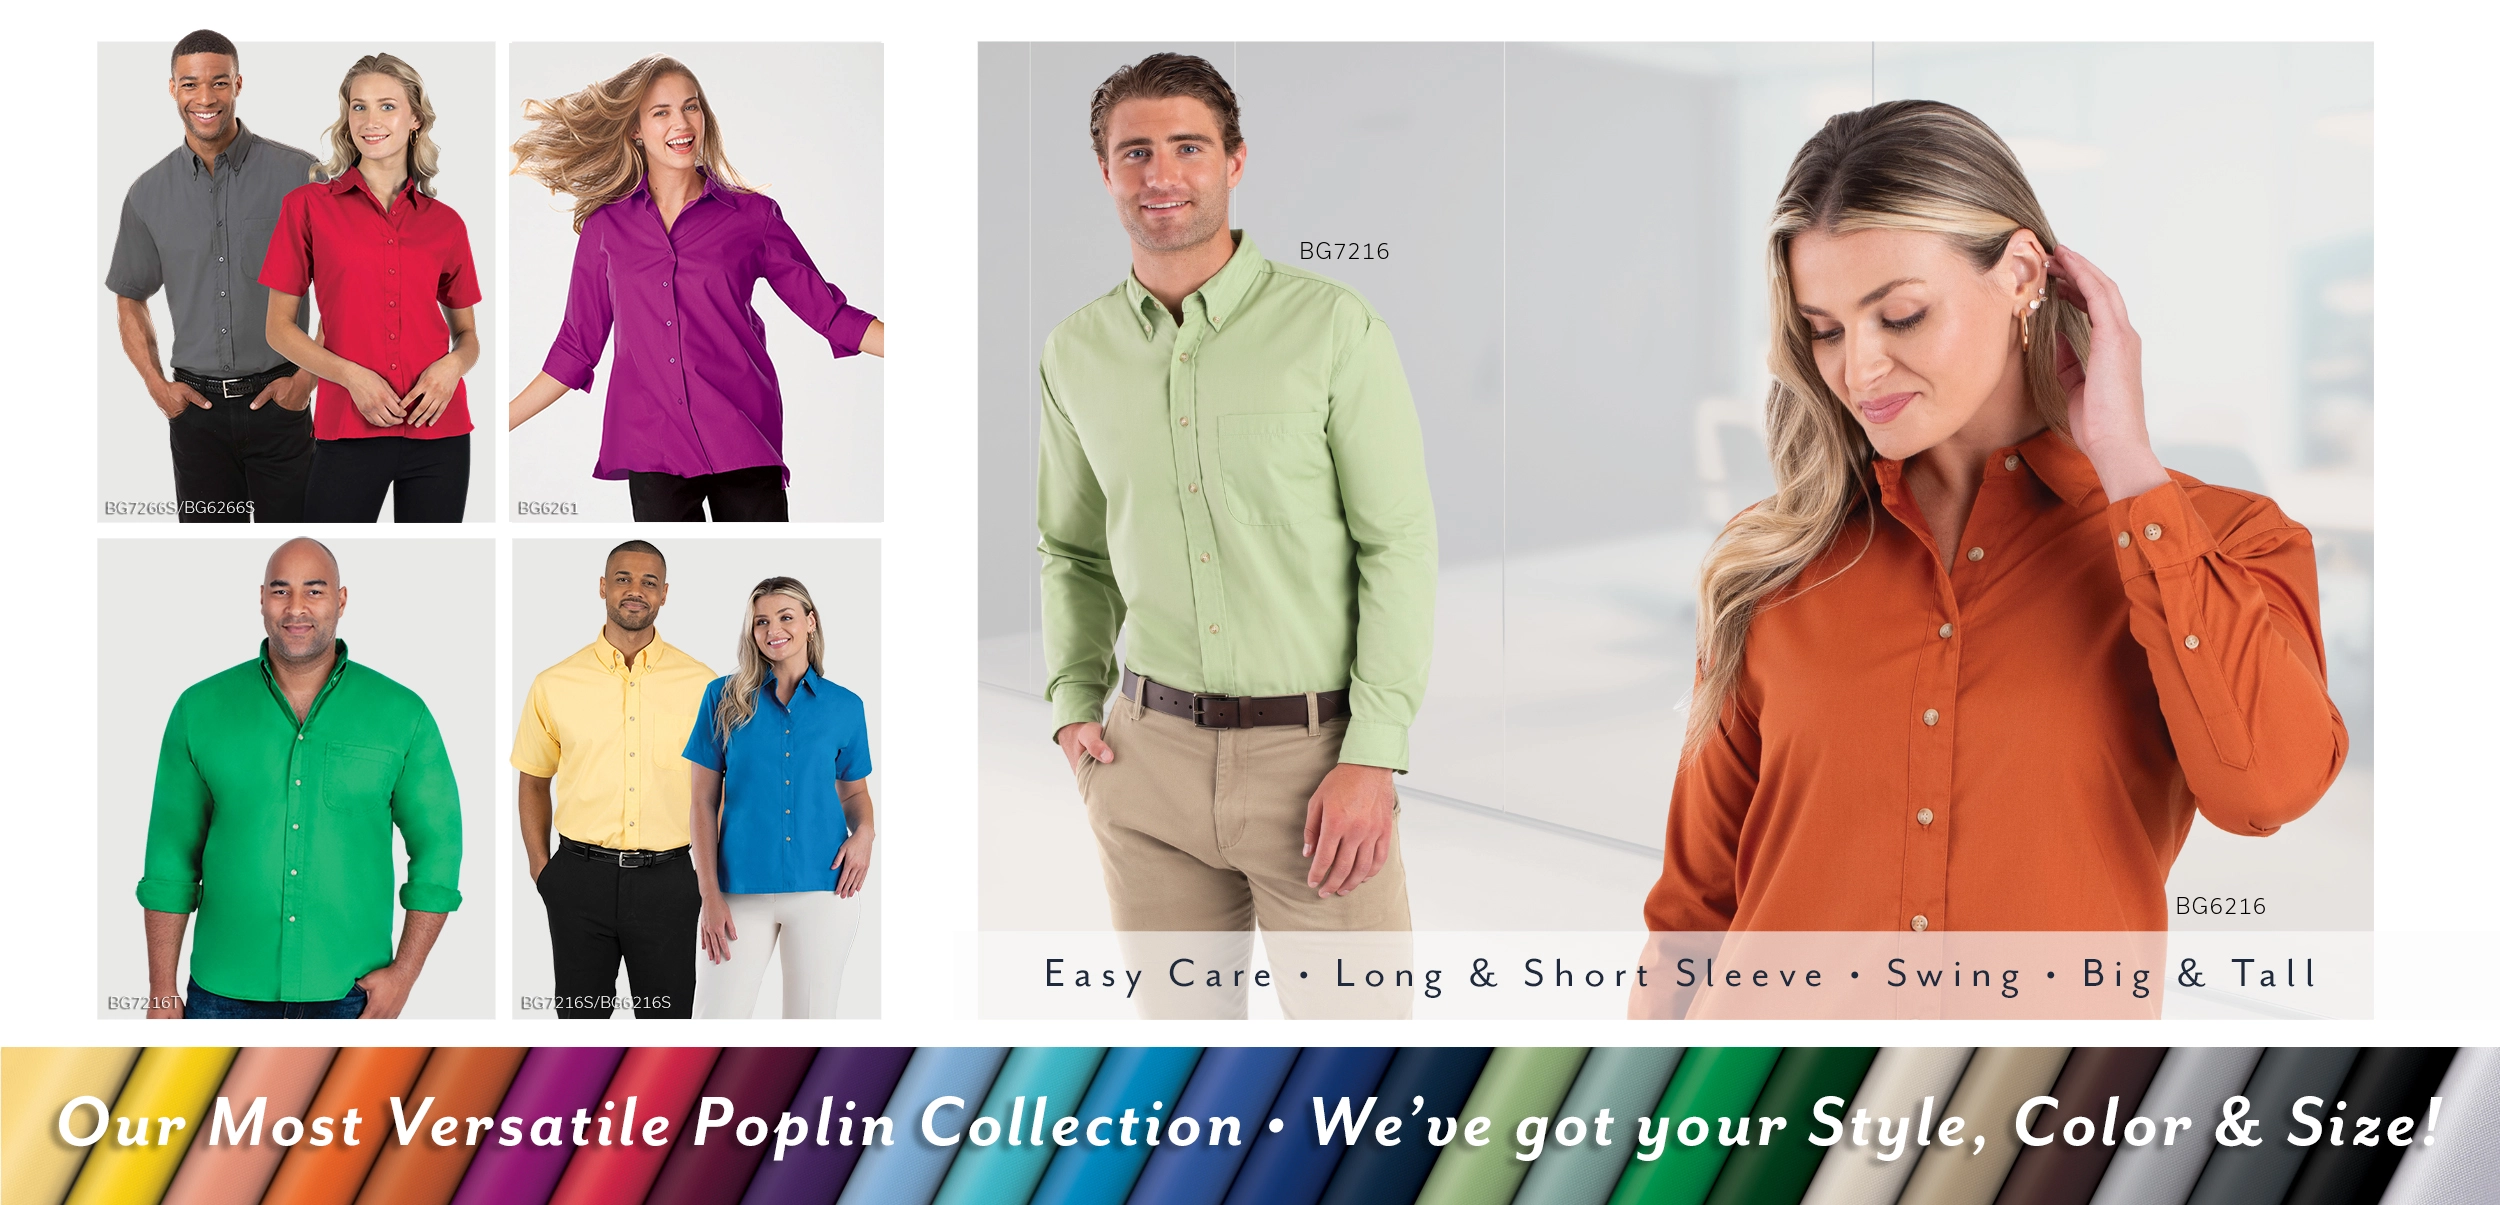 Our Most Versatile Poplin Collection